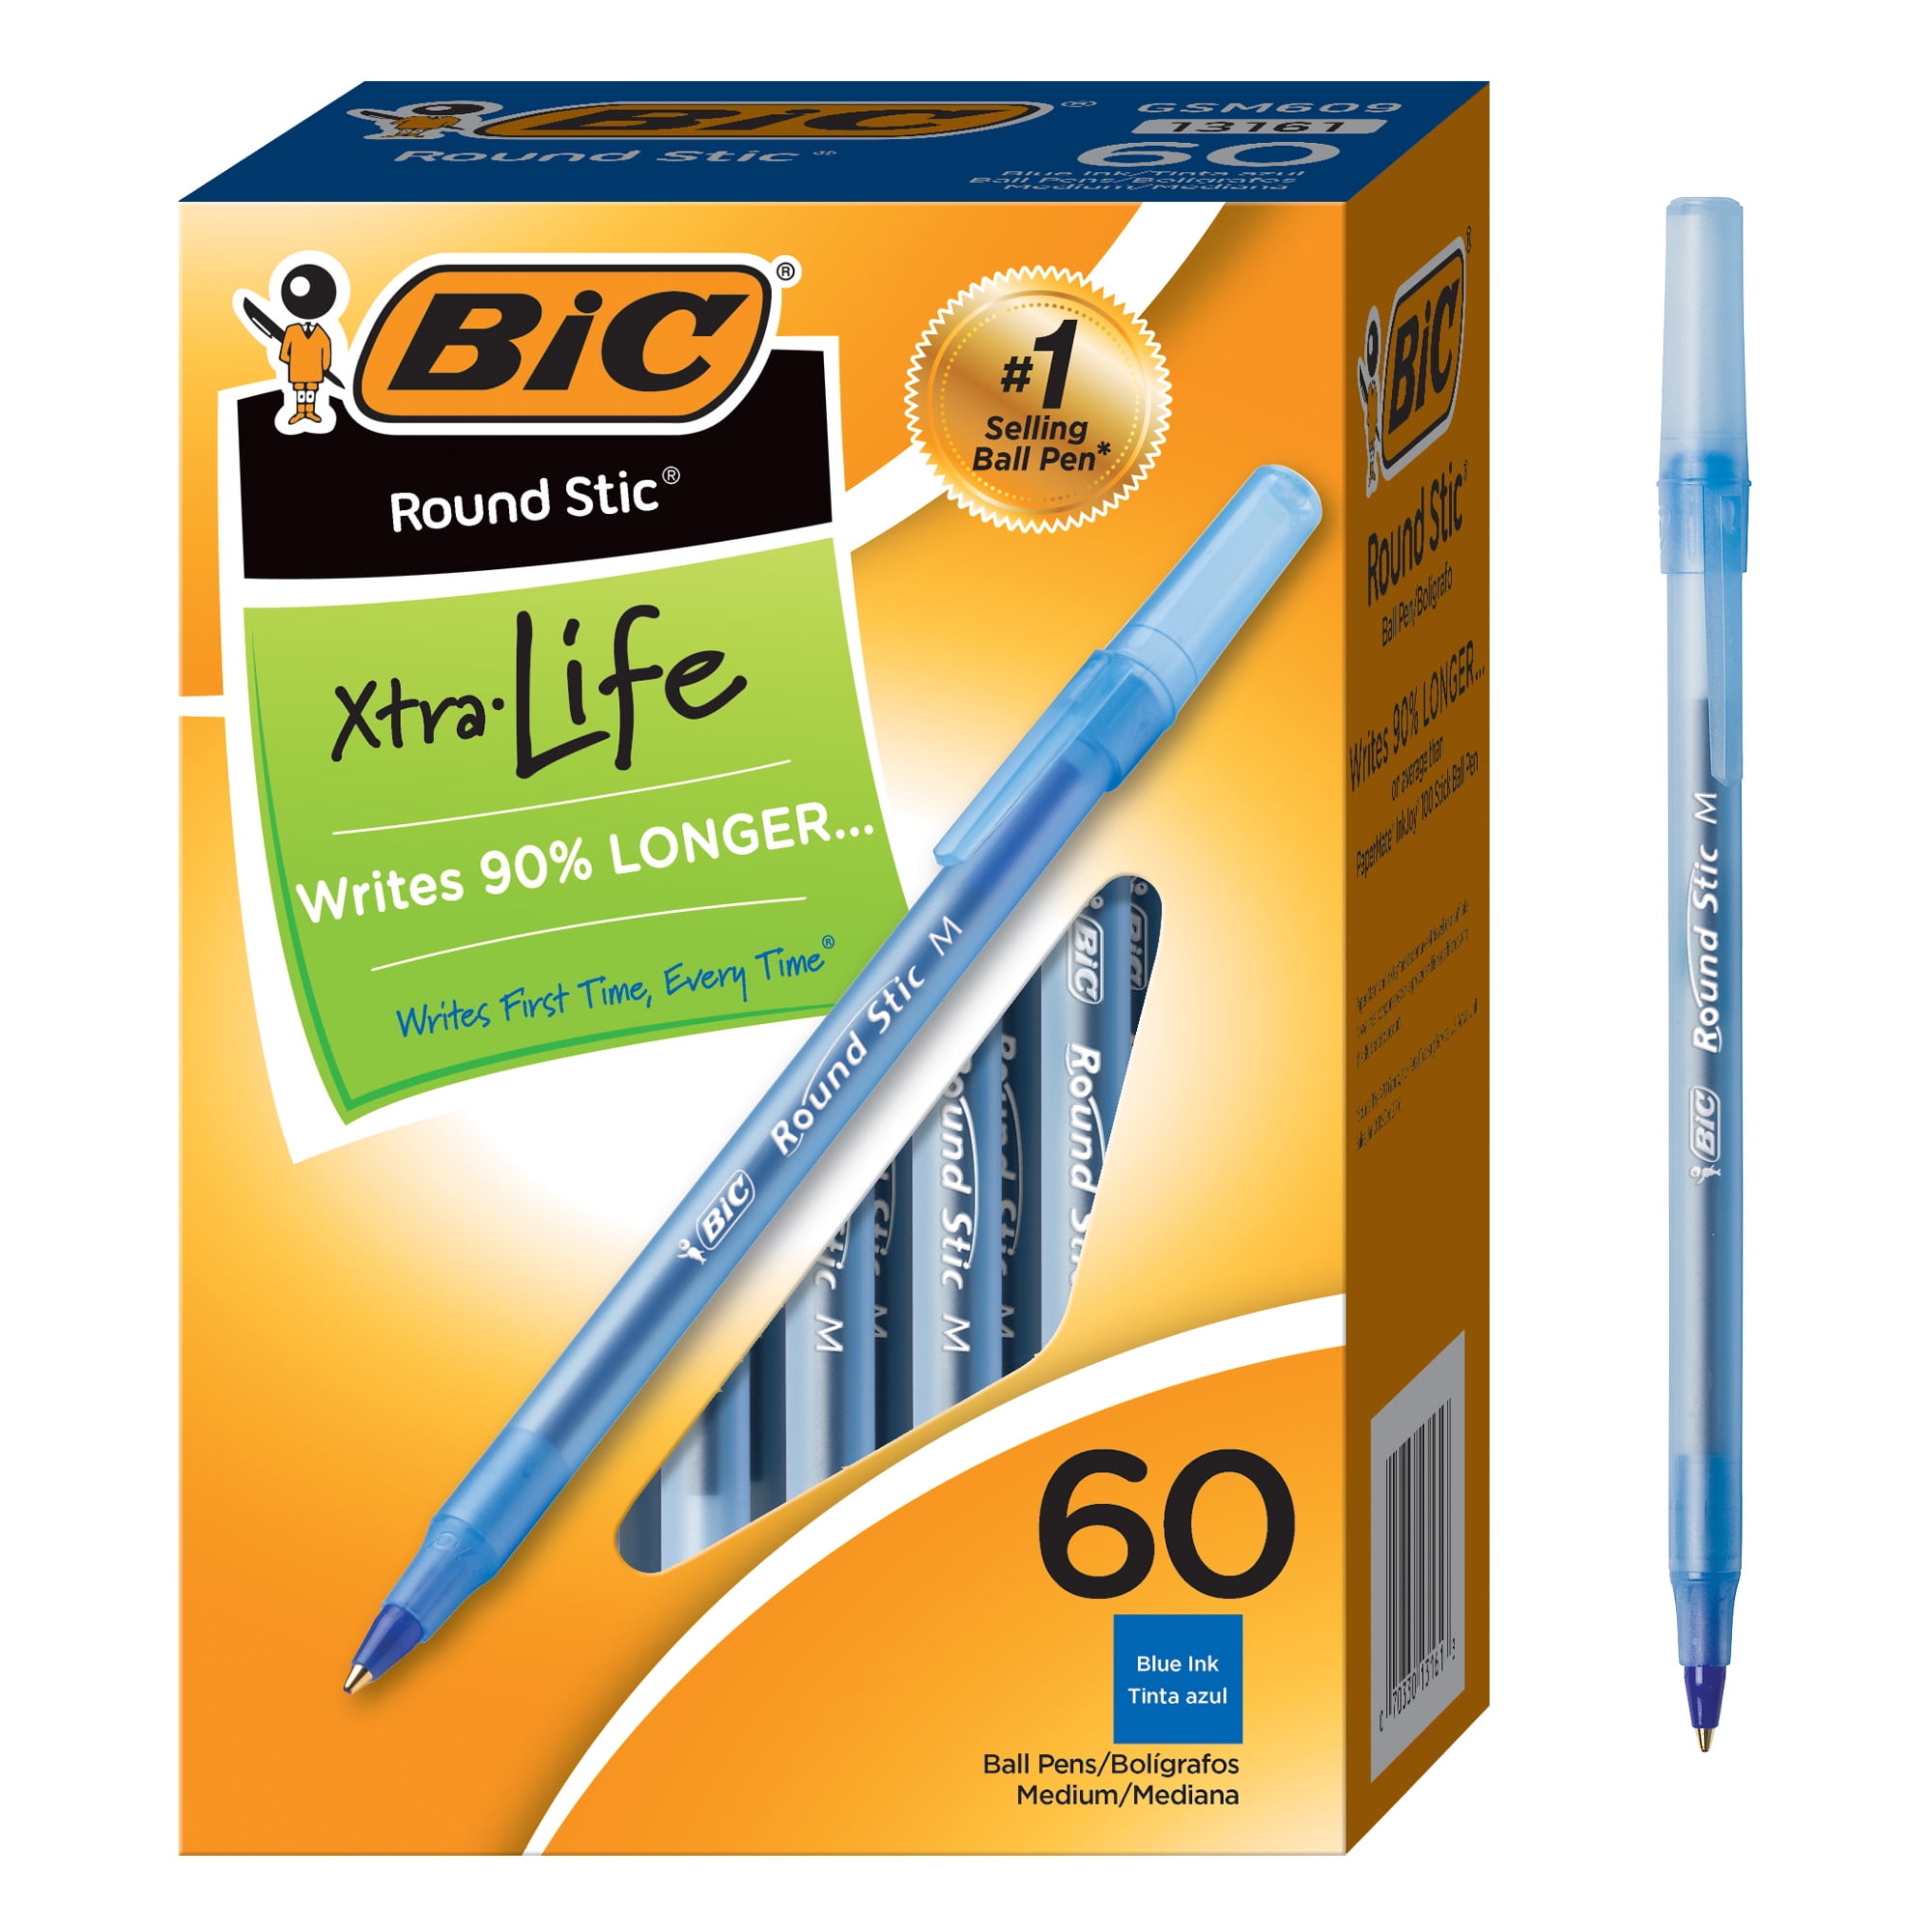 BIC Round Stic Grip Xtra Comfort Ballpoint Pens 3 Boxes 36 Total Blue Medium for sale online 